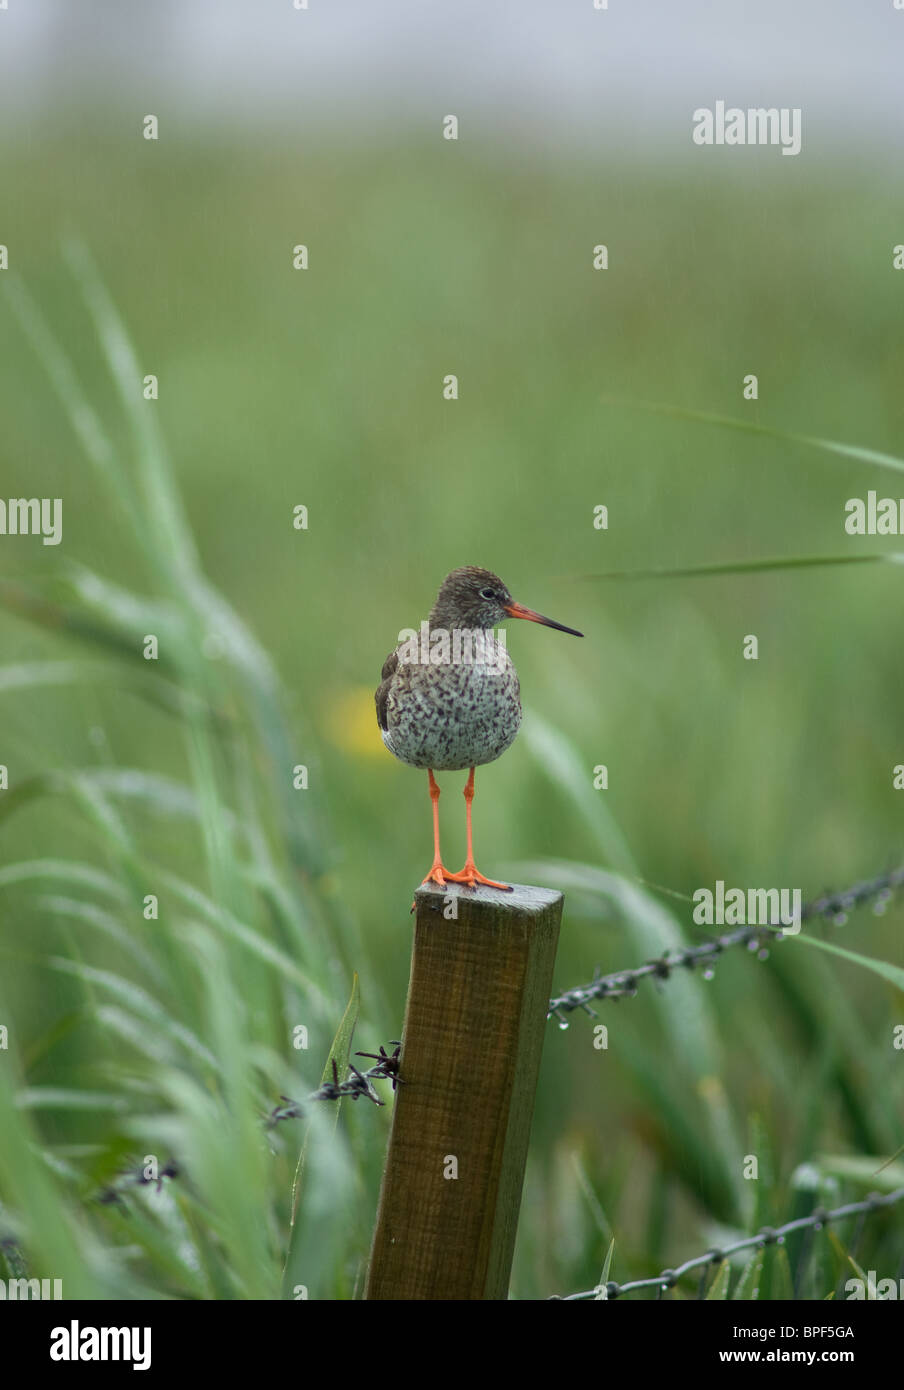 Redshank in its Summer breeding habitat on the South Uist meadow marshes, Outer Hebrides Soctland  SCO 6439 Stock Photo